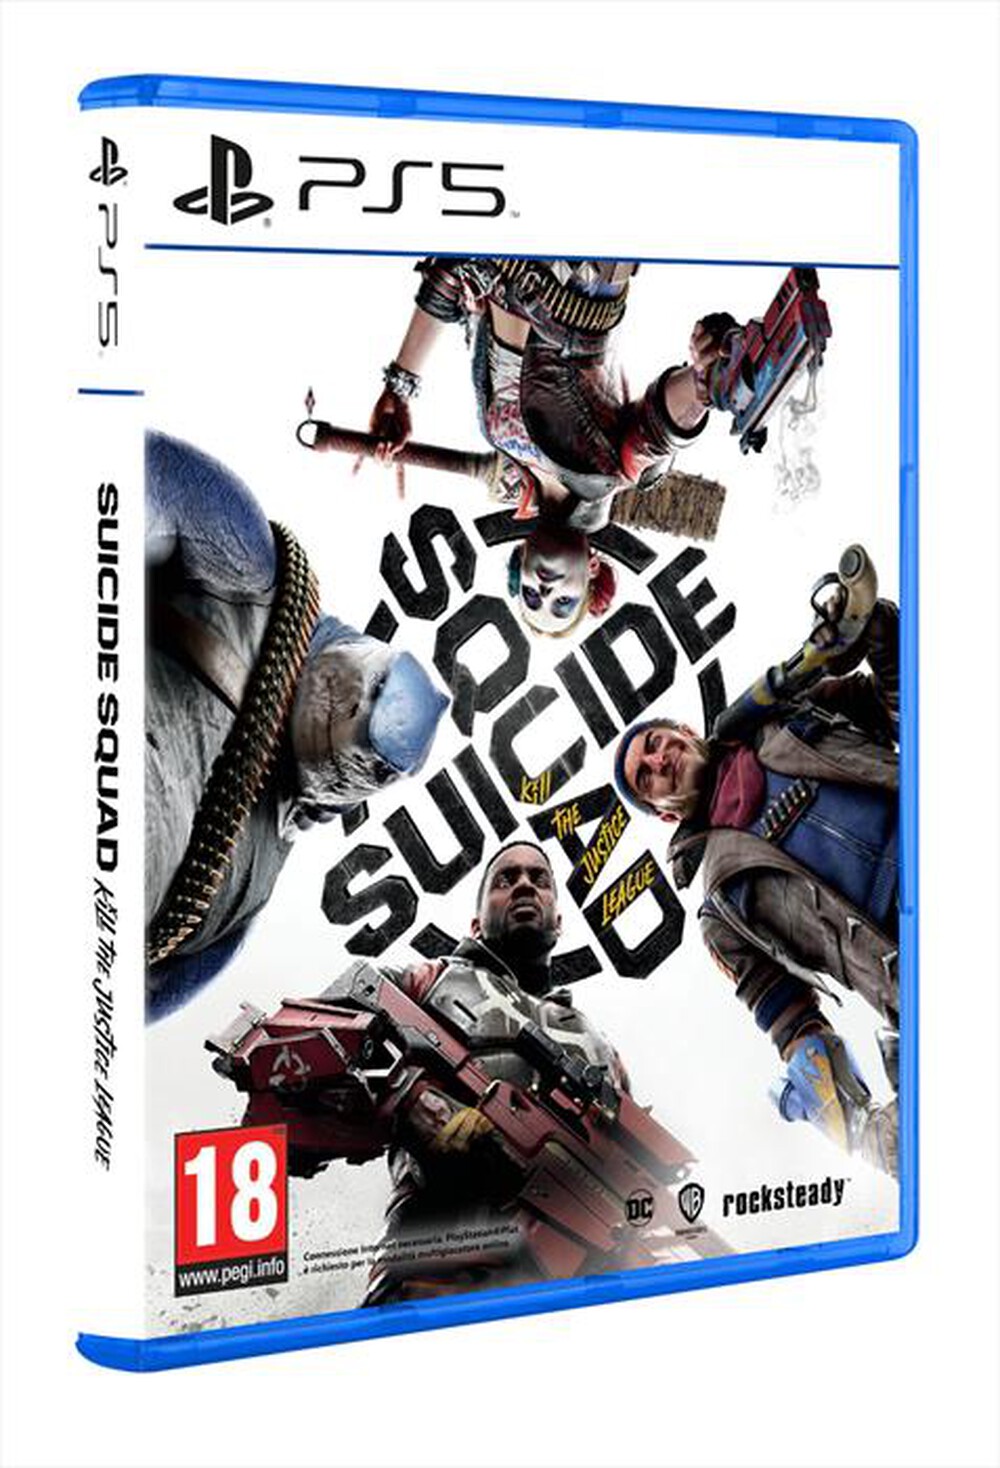 "WARNER GAMES - SUICIDE SQUAD: KILL THE JUSTICE LEAGUE ST (PS5)"